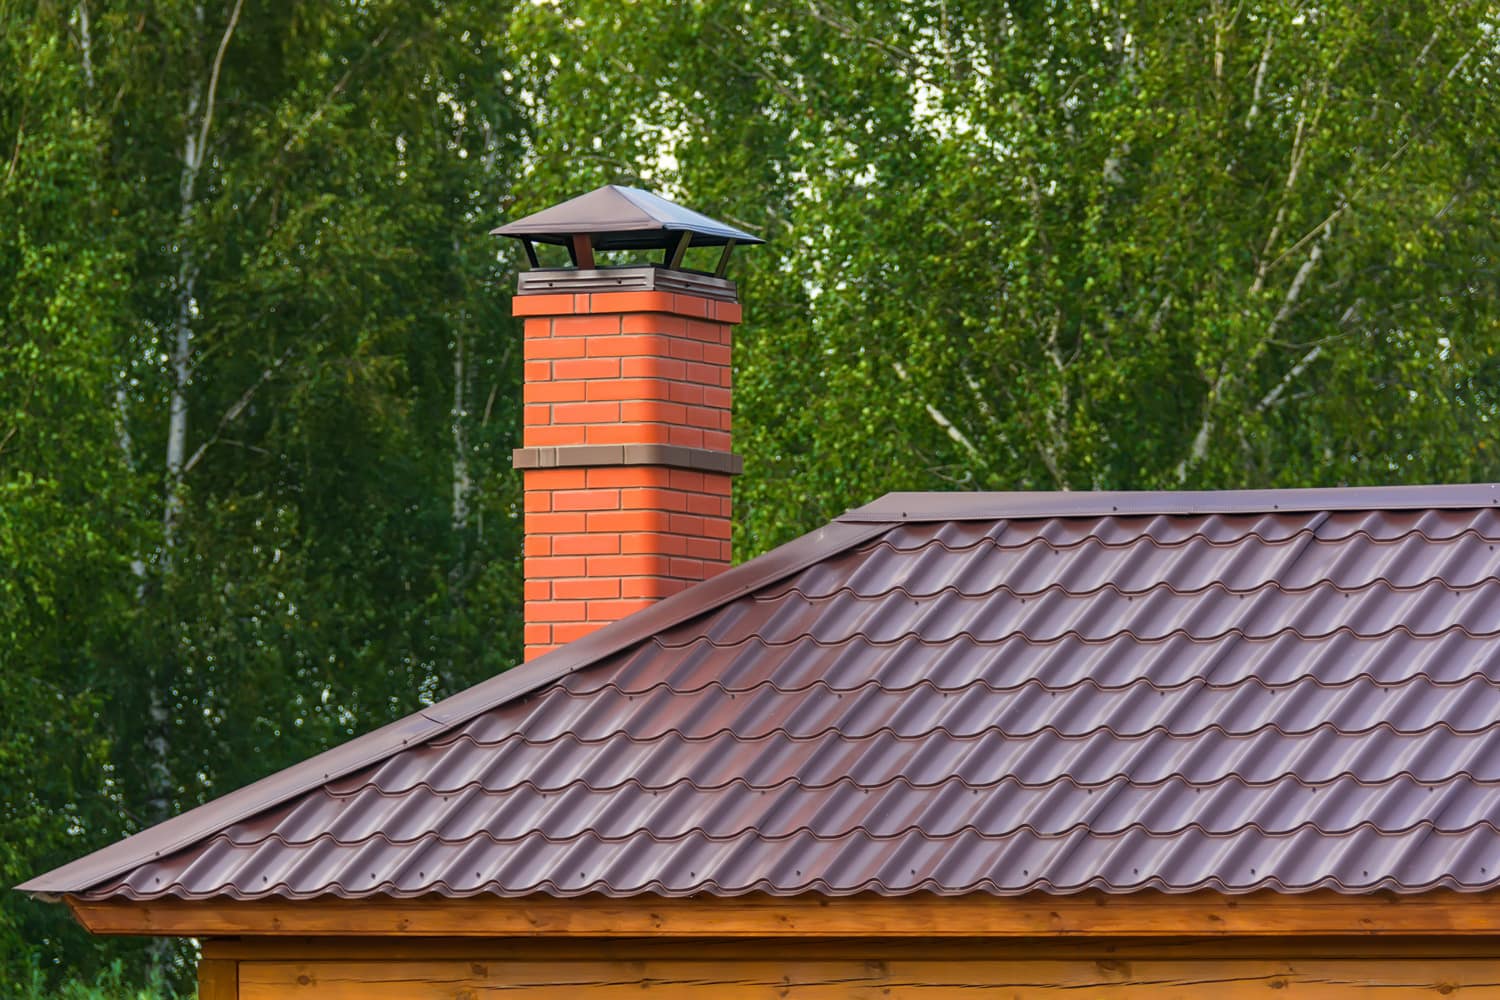 Chimney on roof of country house